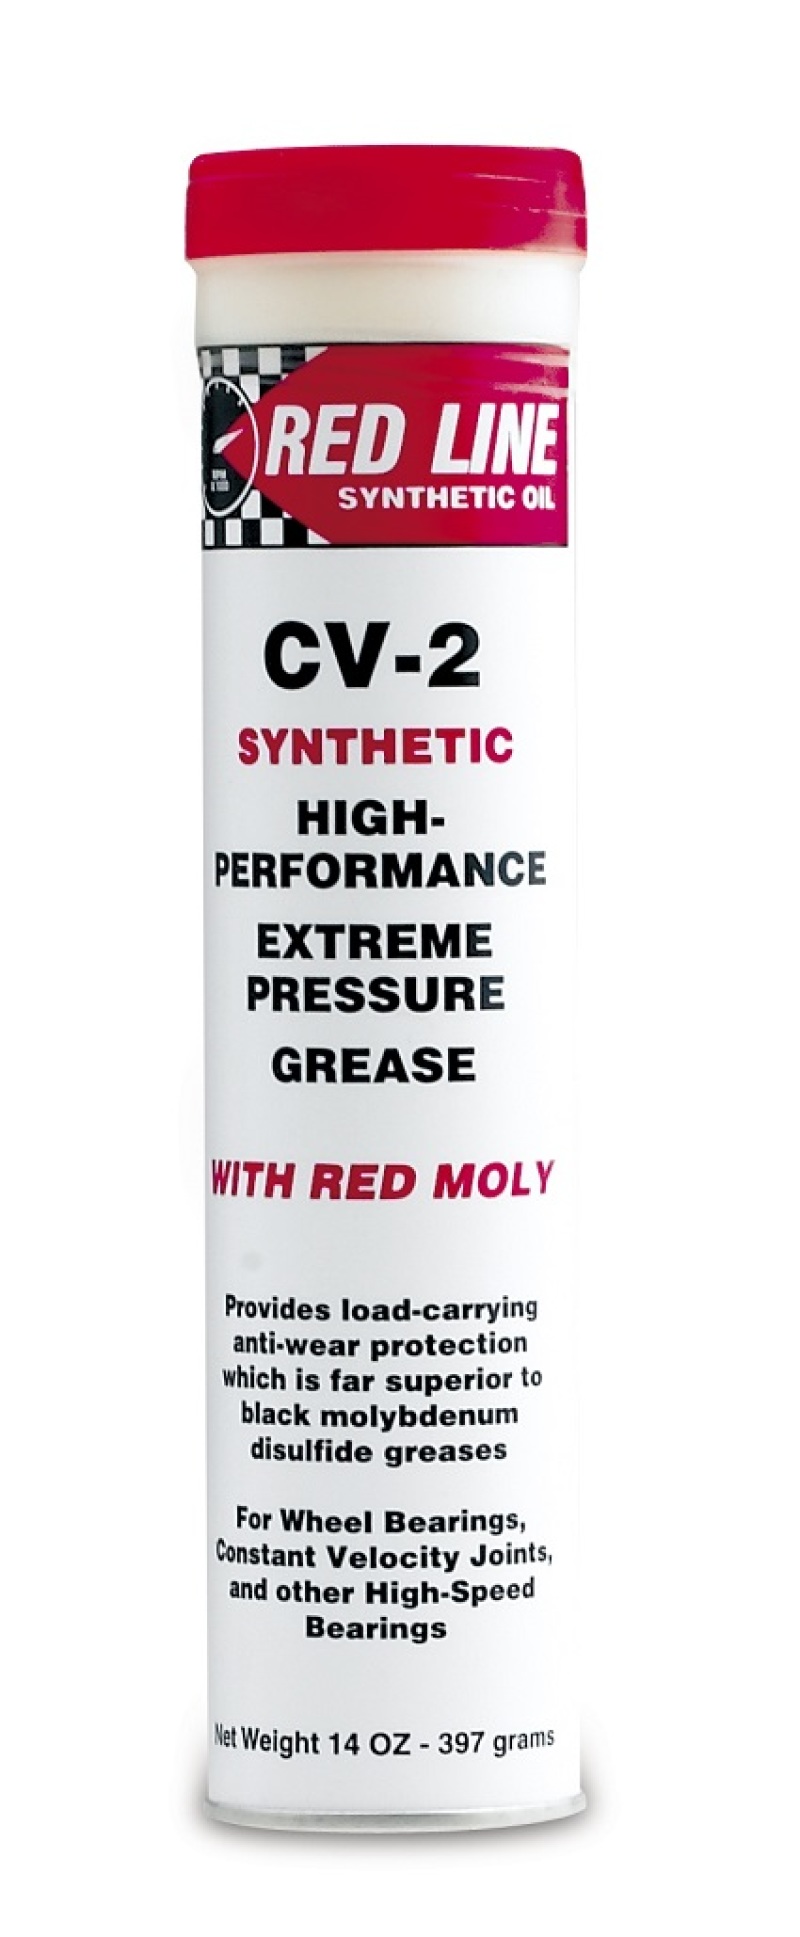 Red Line CV-2 Grease w/Moly - 14oz. - 80402